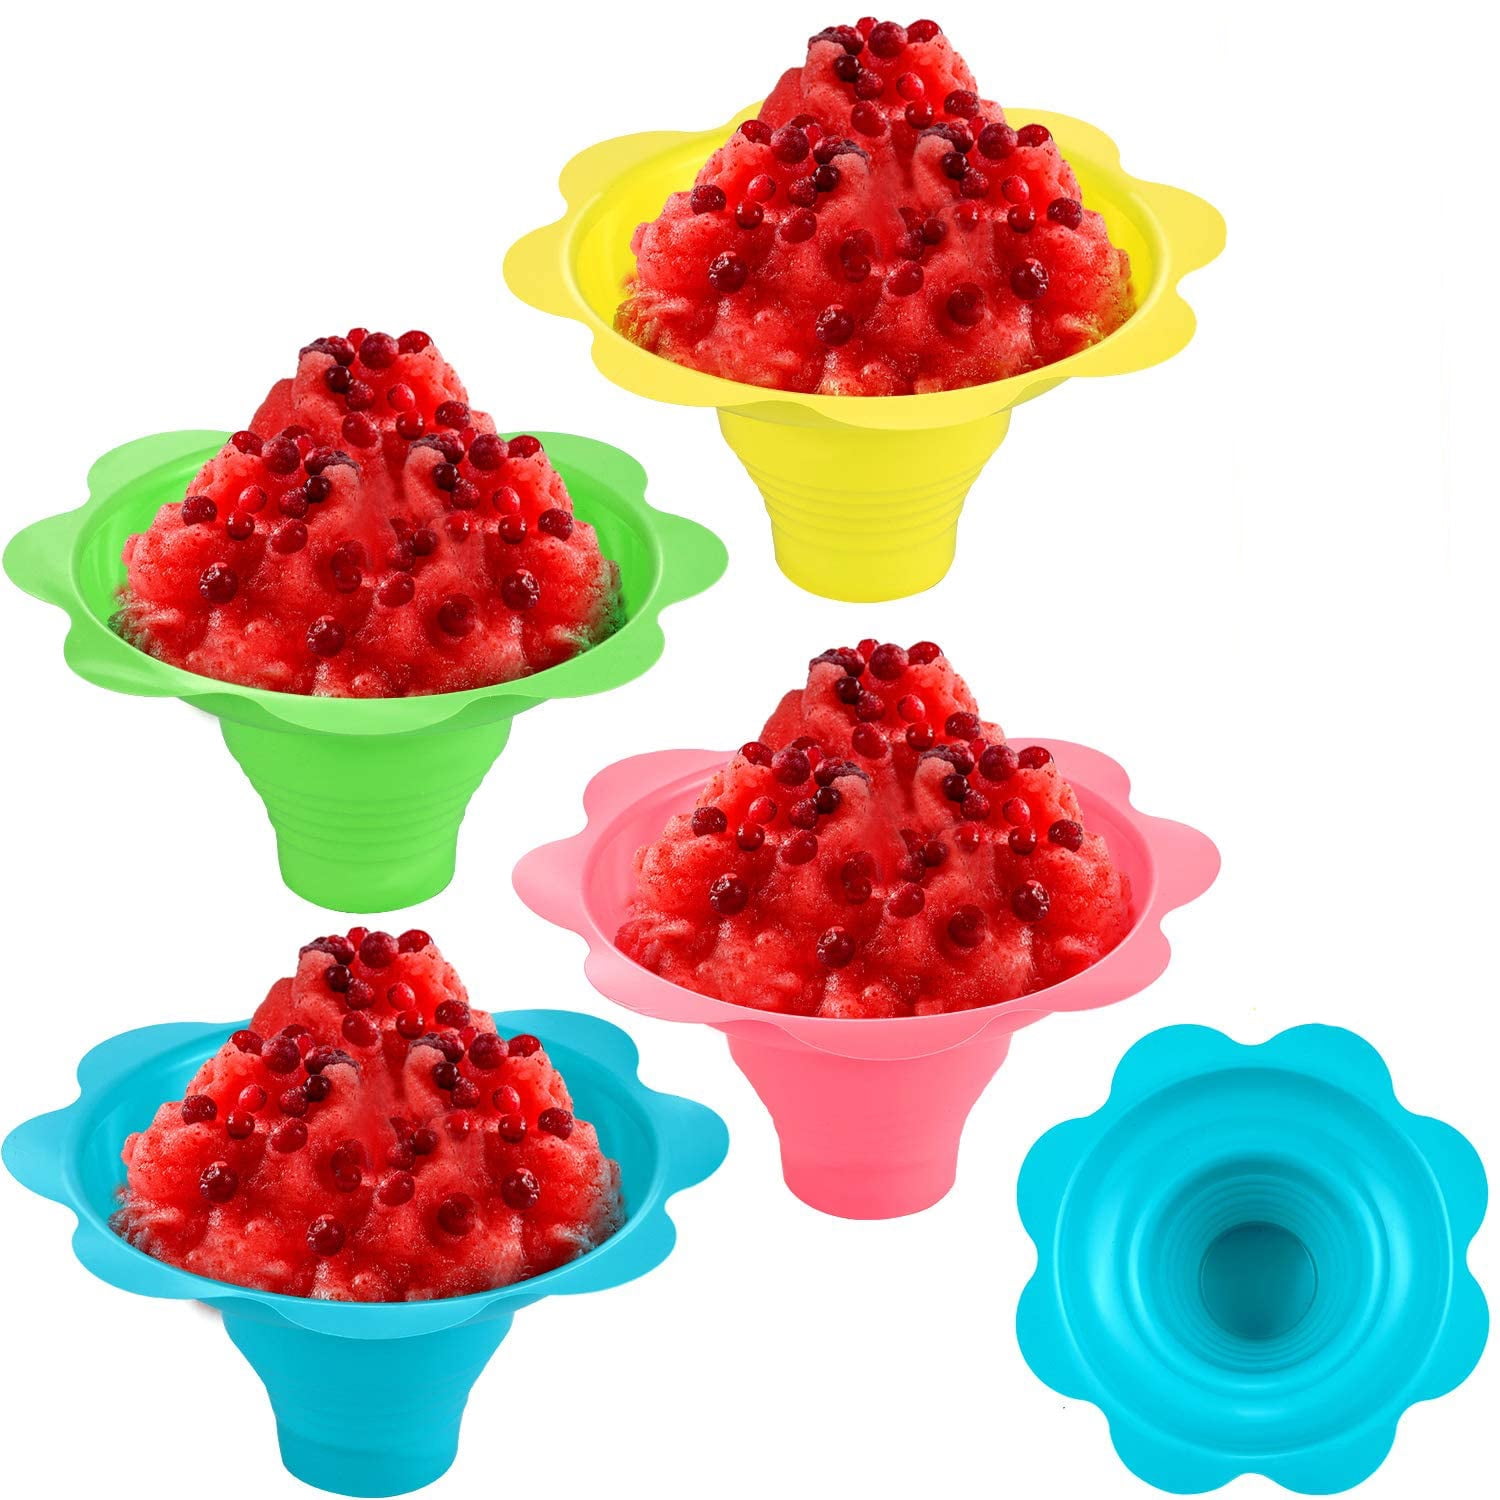 50 Pcs Snow Cone Flower Cups Flower Drip Cups and 50 Pcs Spoon Straws Set Small Bowls Snow Cone Supply Shaved Ice Cups Ice Cream Bowls for Kids Birthday Party or Summer Cookout 